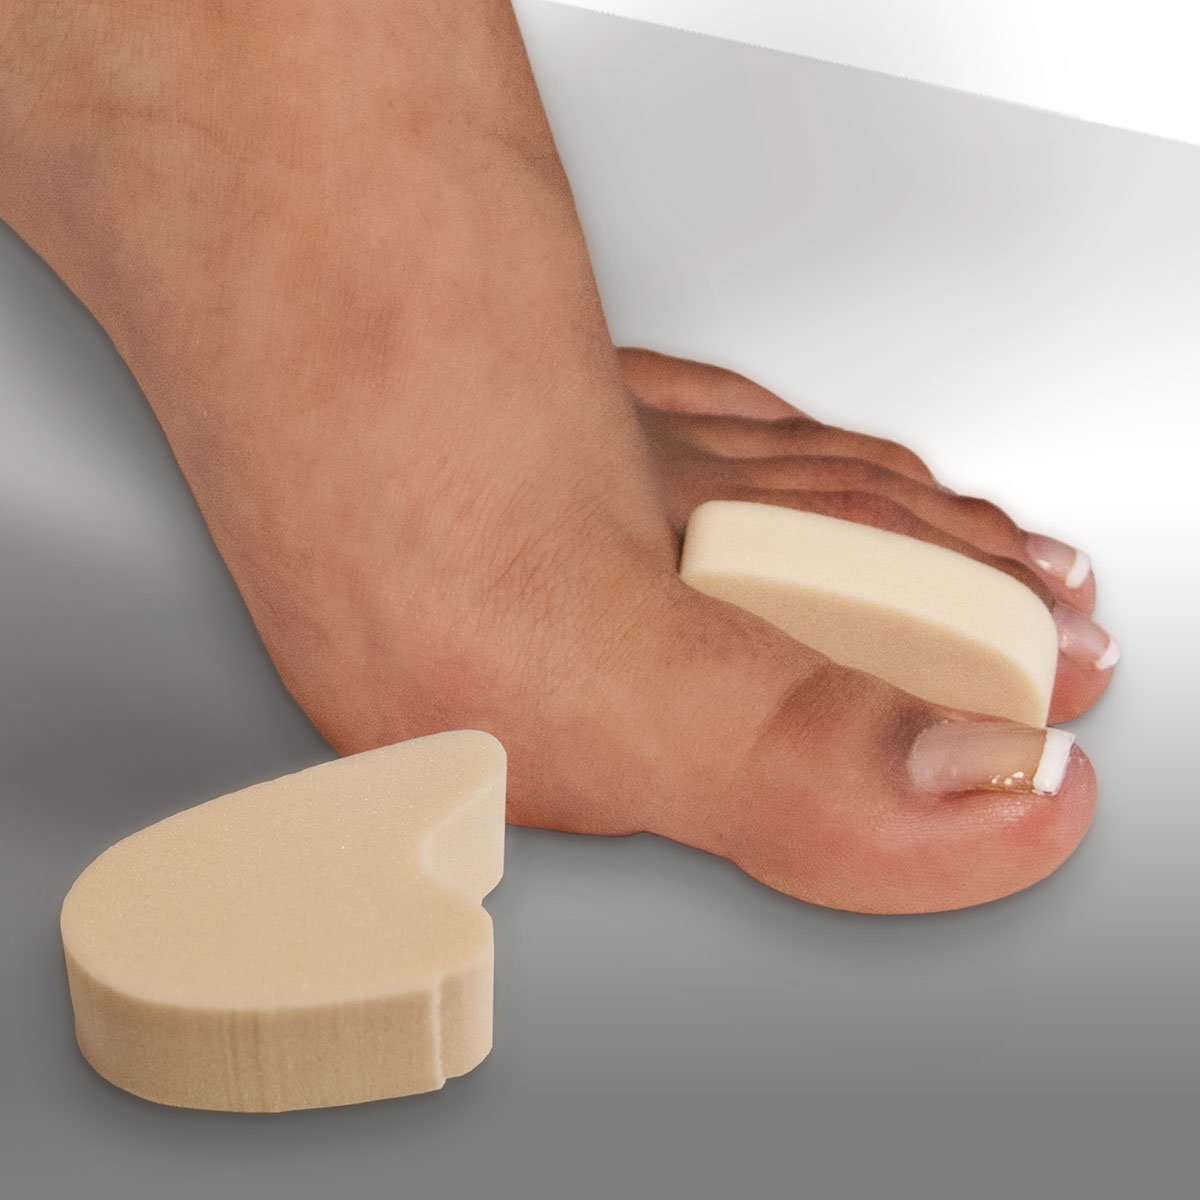 Toe Separator - Large - Firm